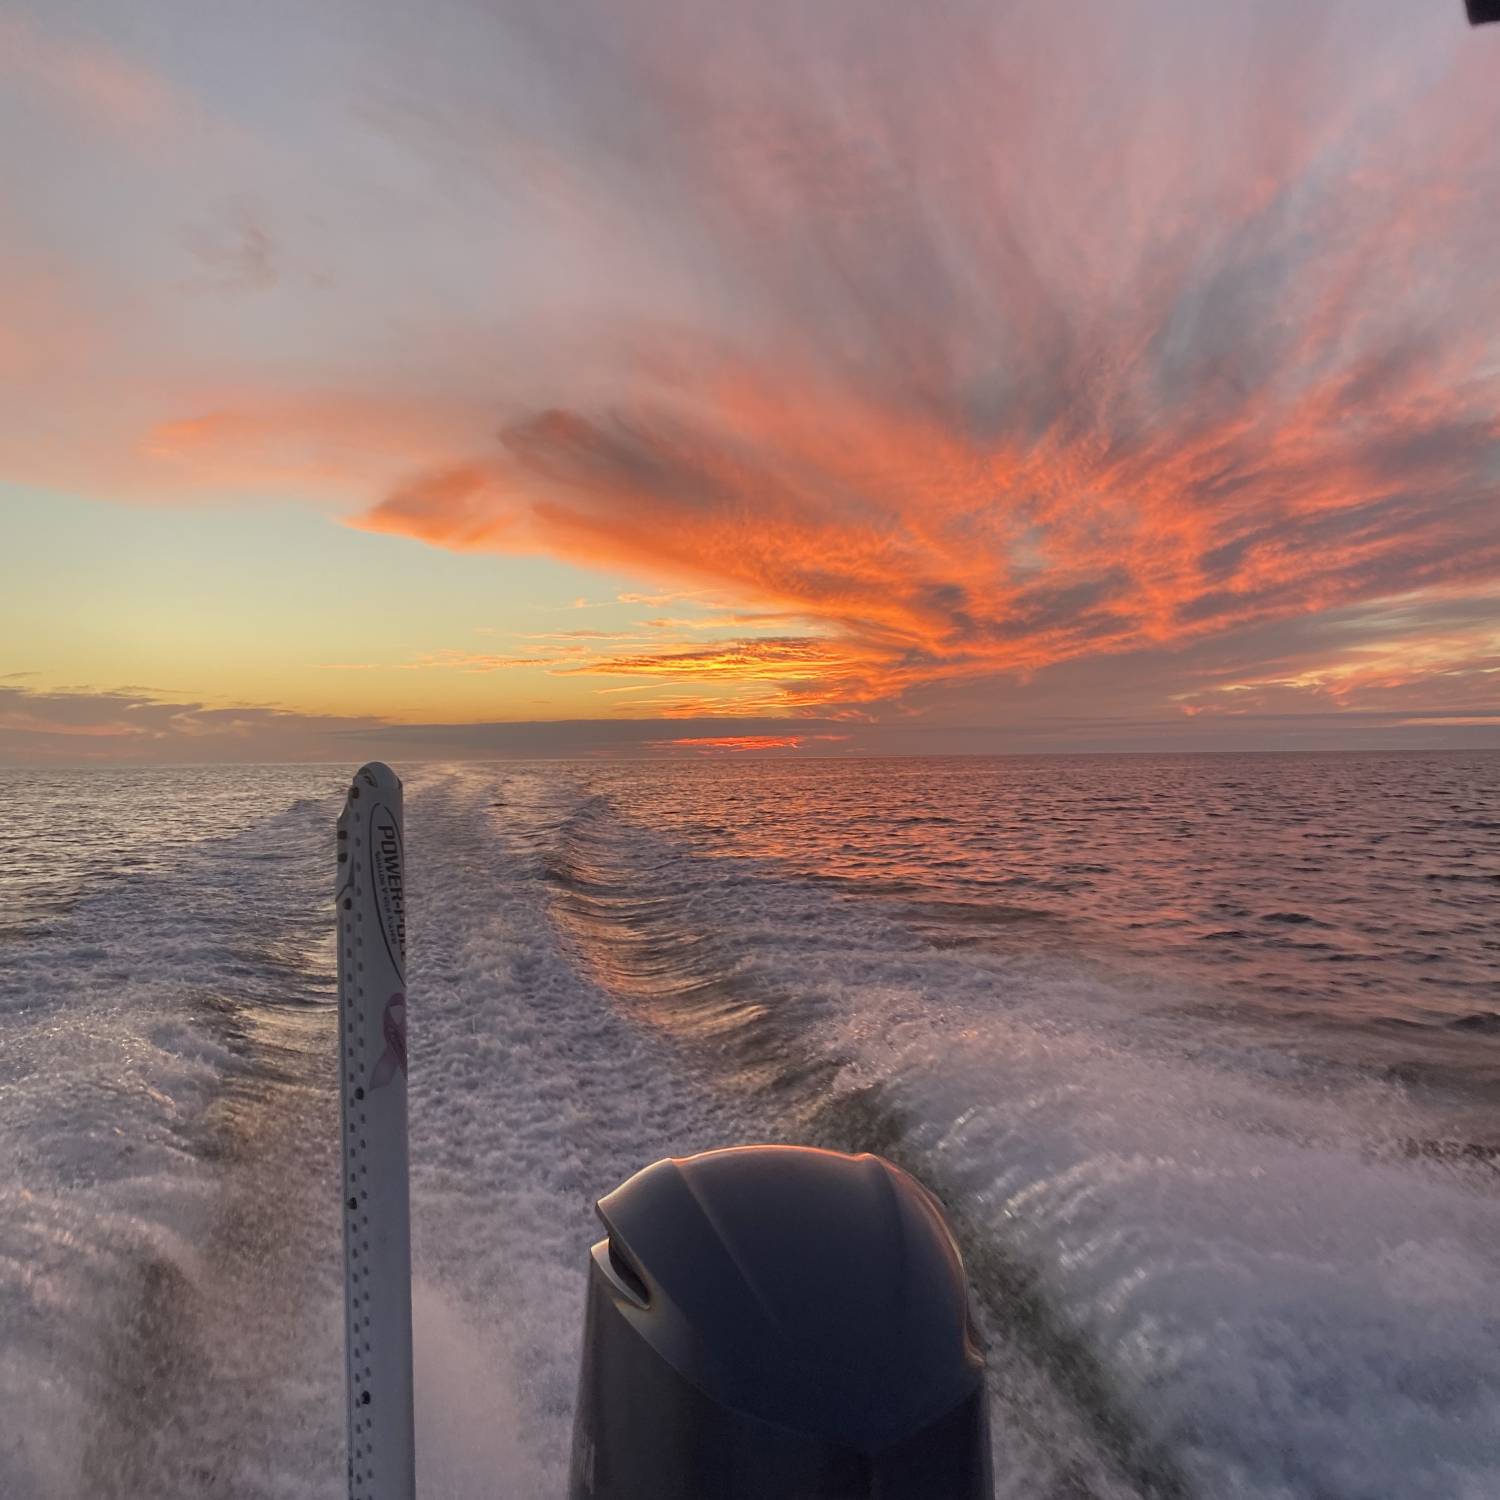 Title: Winter here in Florida is on fire!! - On board their Sportsman Masters 247 Bay Boat - Location: Crystal River. Participating in the Photo Contest #SportsmanMarch